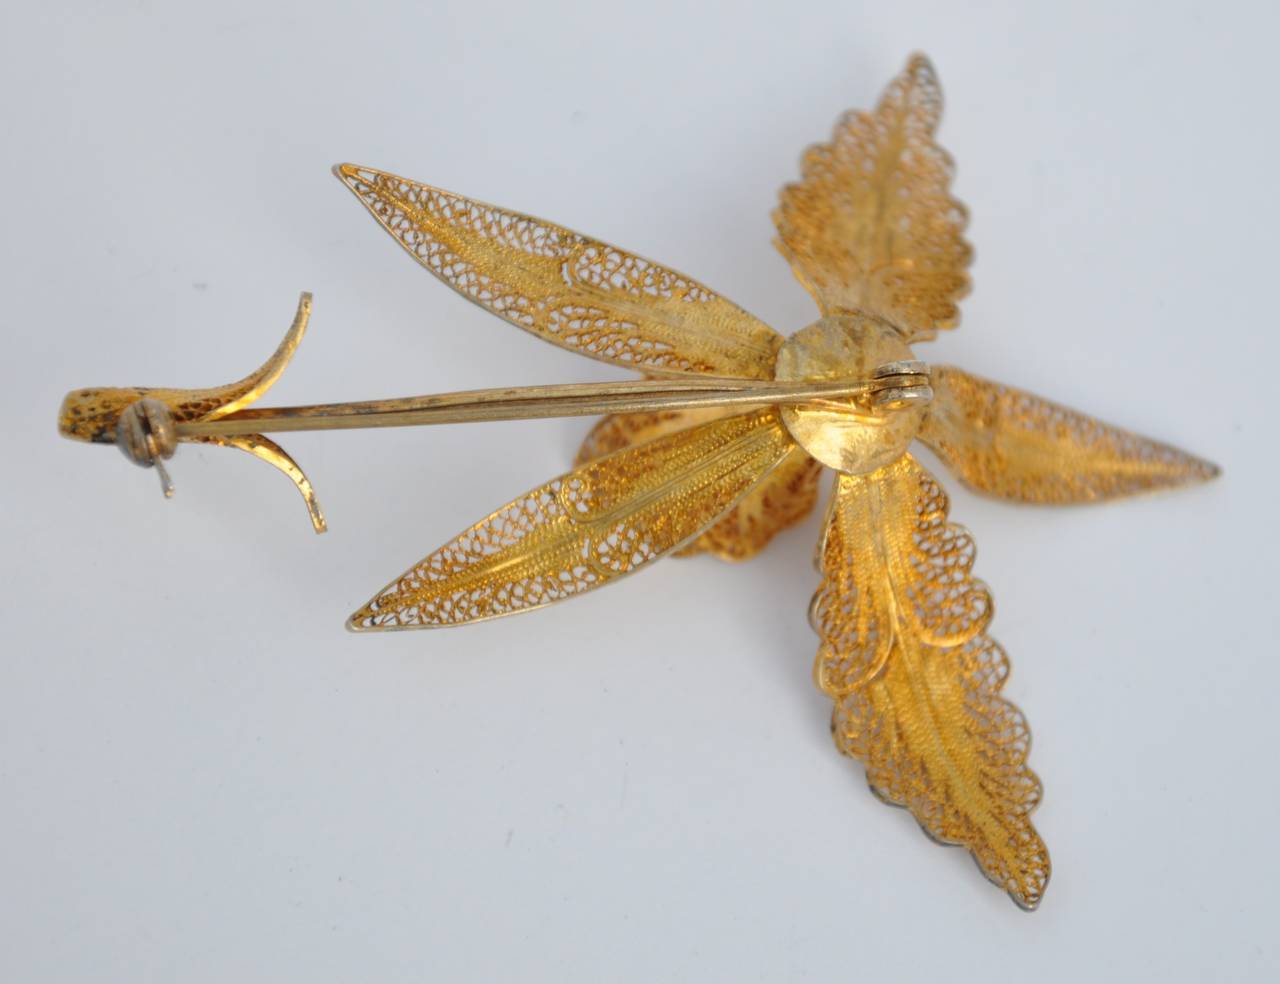 This wonderfully detailed gilded gold filigree "Orchid" brooch measures 3 1/4" in length, 2 5/8" in height and 1" in depth.